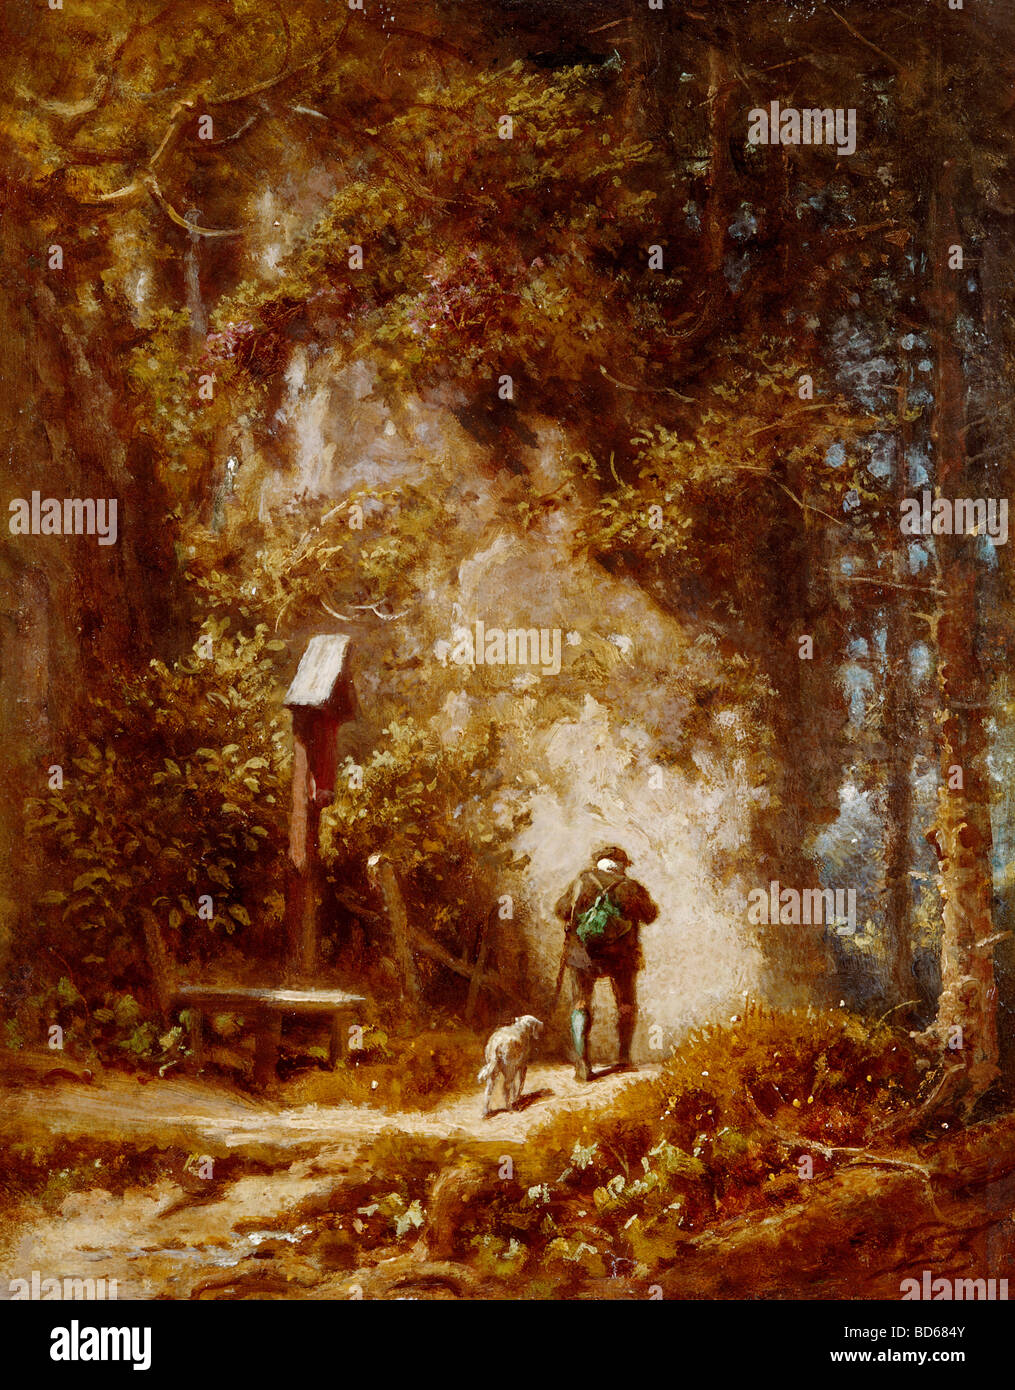 fine arts, Spitzweg, Carl (1808 - 1885), painting, hunter in the forest, Wimmer Gallery, Munich, wood, woods, Karl, German, Bied Stock Photo